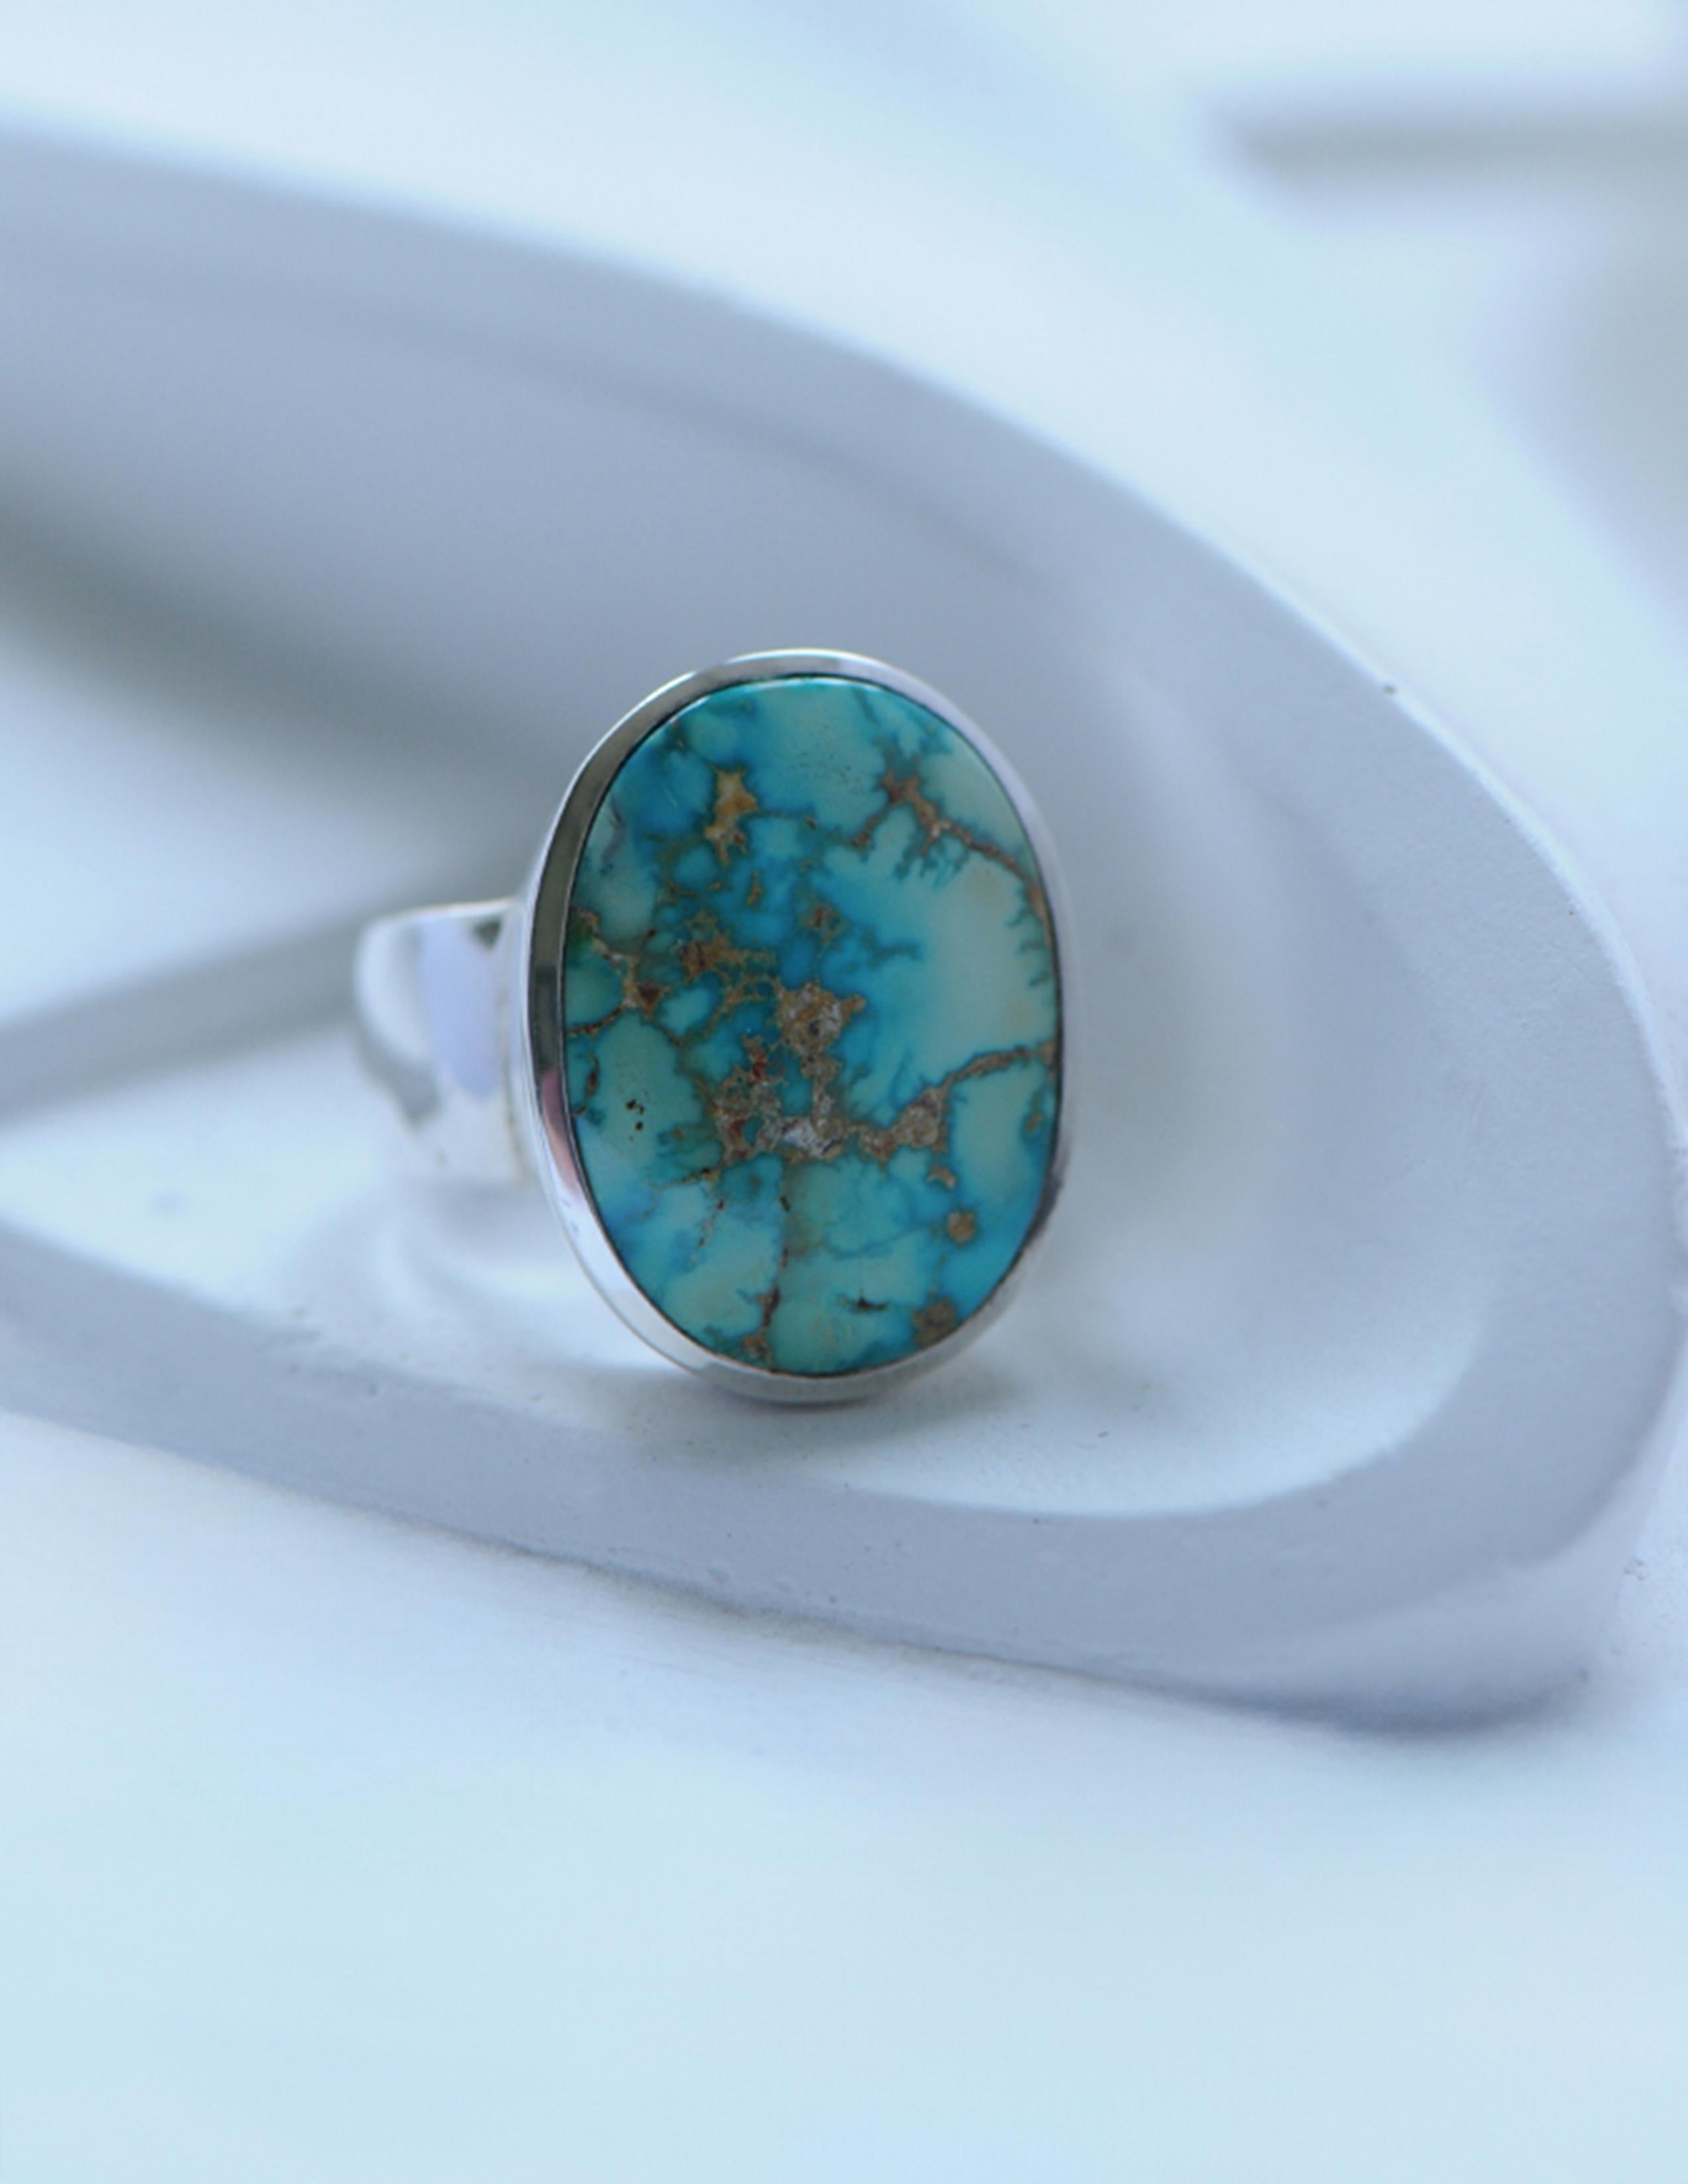 Oval Cut Large Turquoise Silver Ring Polychrome Seaweed Seafoam Green Color Natural Gem For Sale